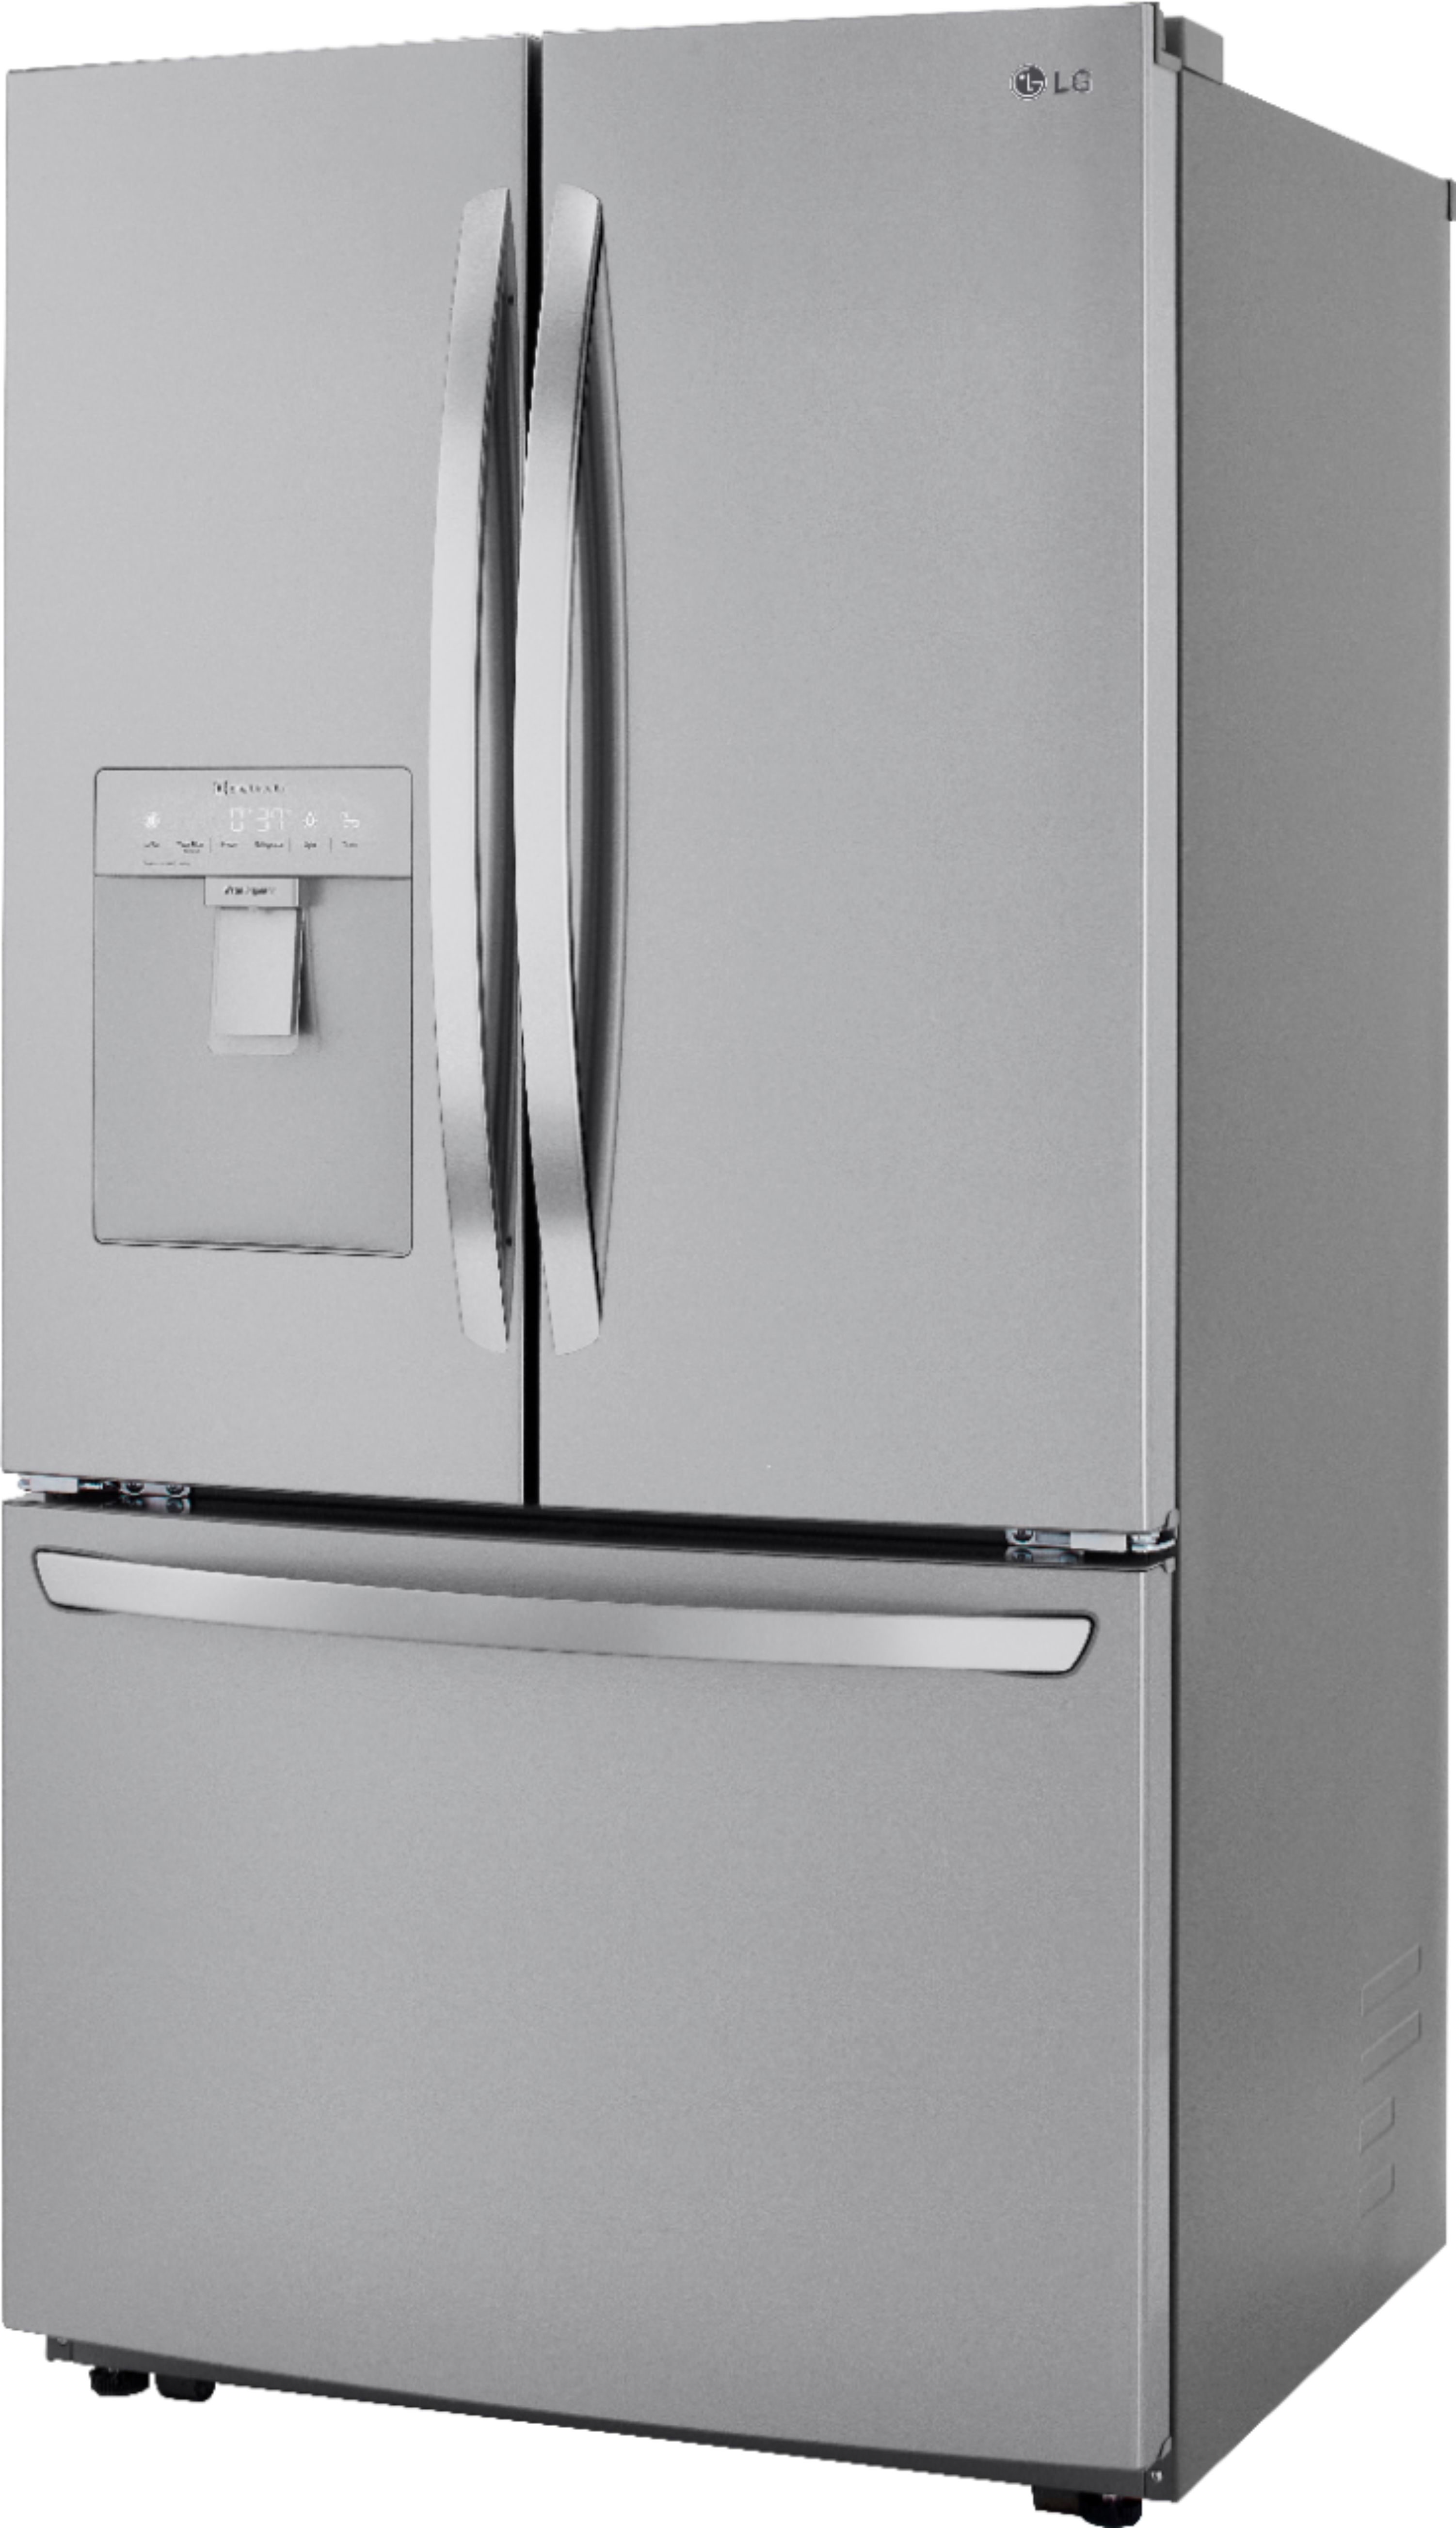 LG 29 Cu. Ft. French Door Smart Refrigerator with External Water